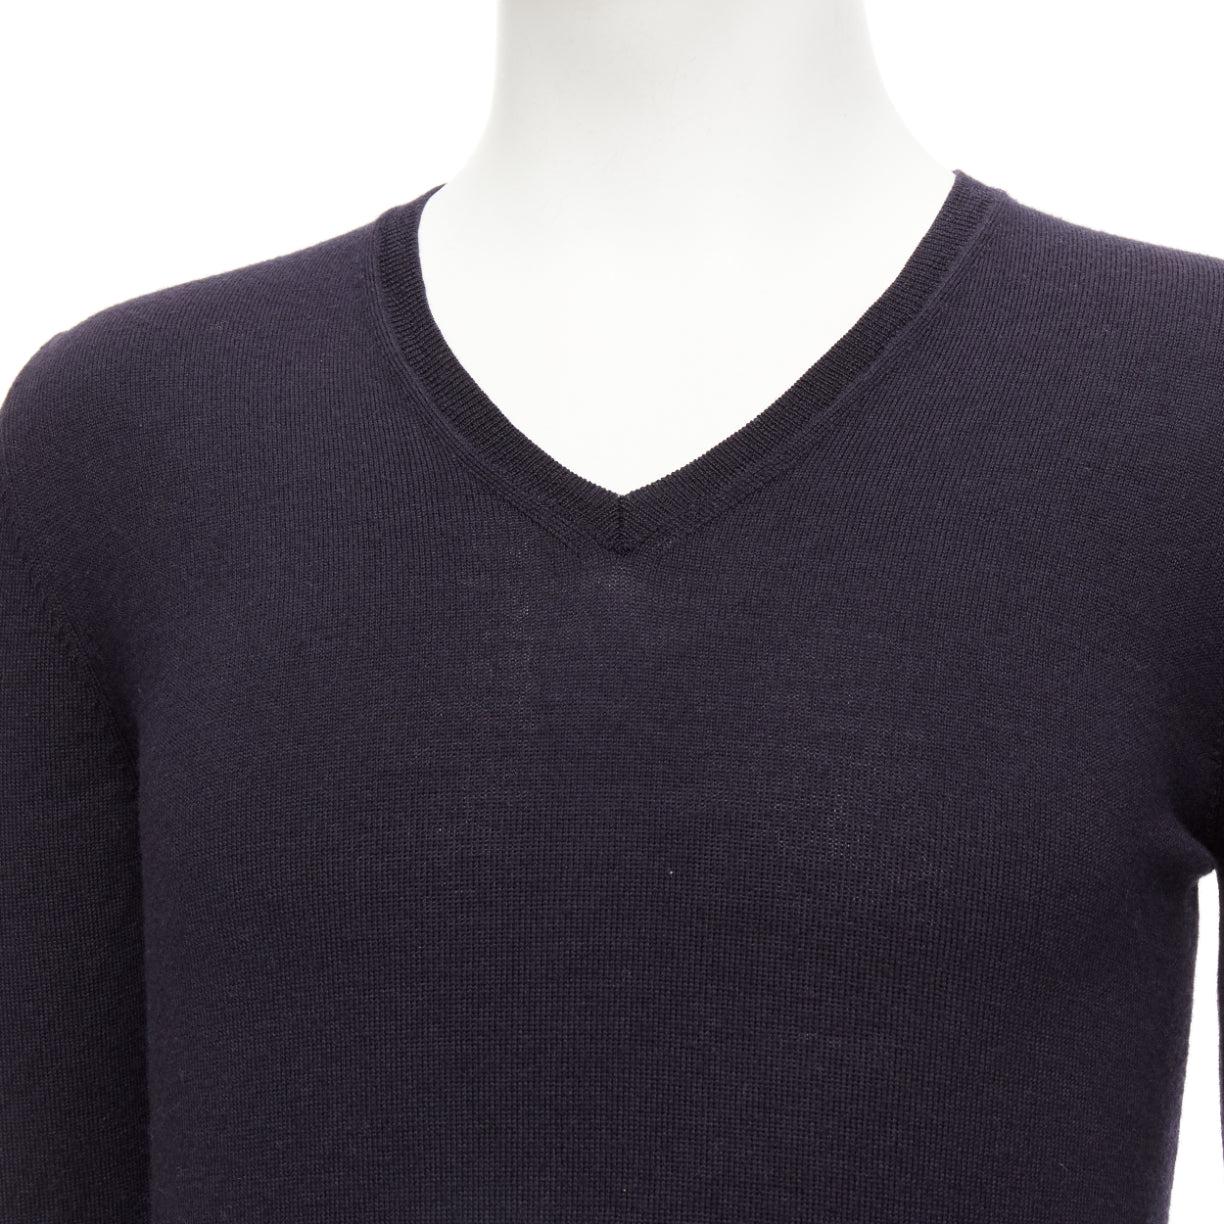 PRADA 2010 navy wool long sleeve V-neck classic sweater IT44 XS
Reference: MLCO/A00012
Brand: Prada
Designer: Miuccia Prada
Collection: 2010
Material: Wool
Color: Navy
Pattern: Solid
Closure: Pullover

CONDITION:
Condition: Very good, this item was